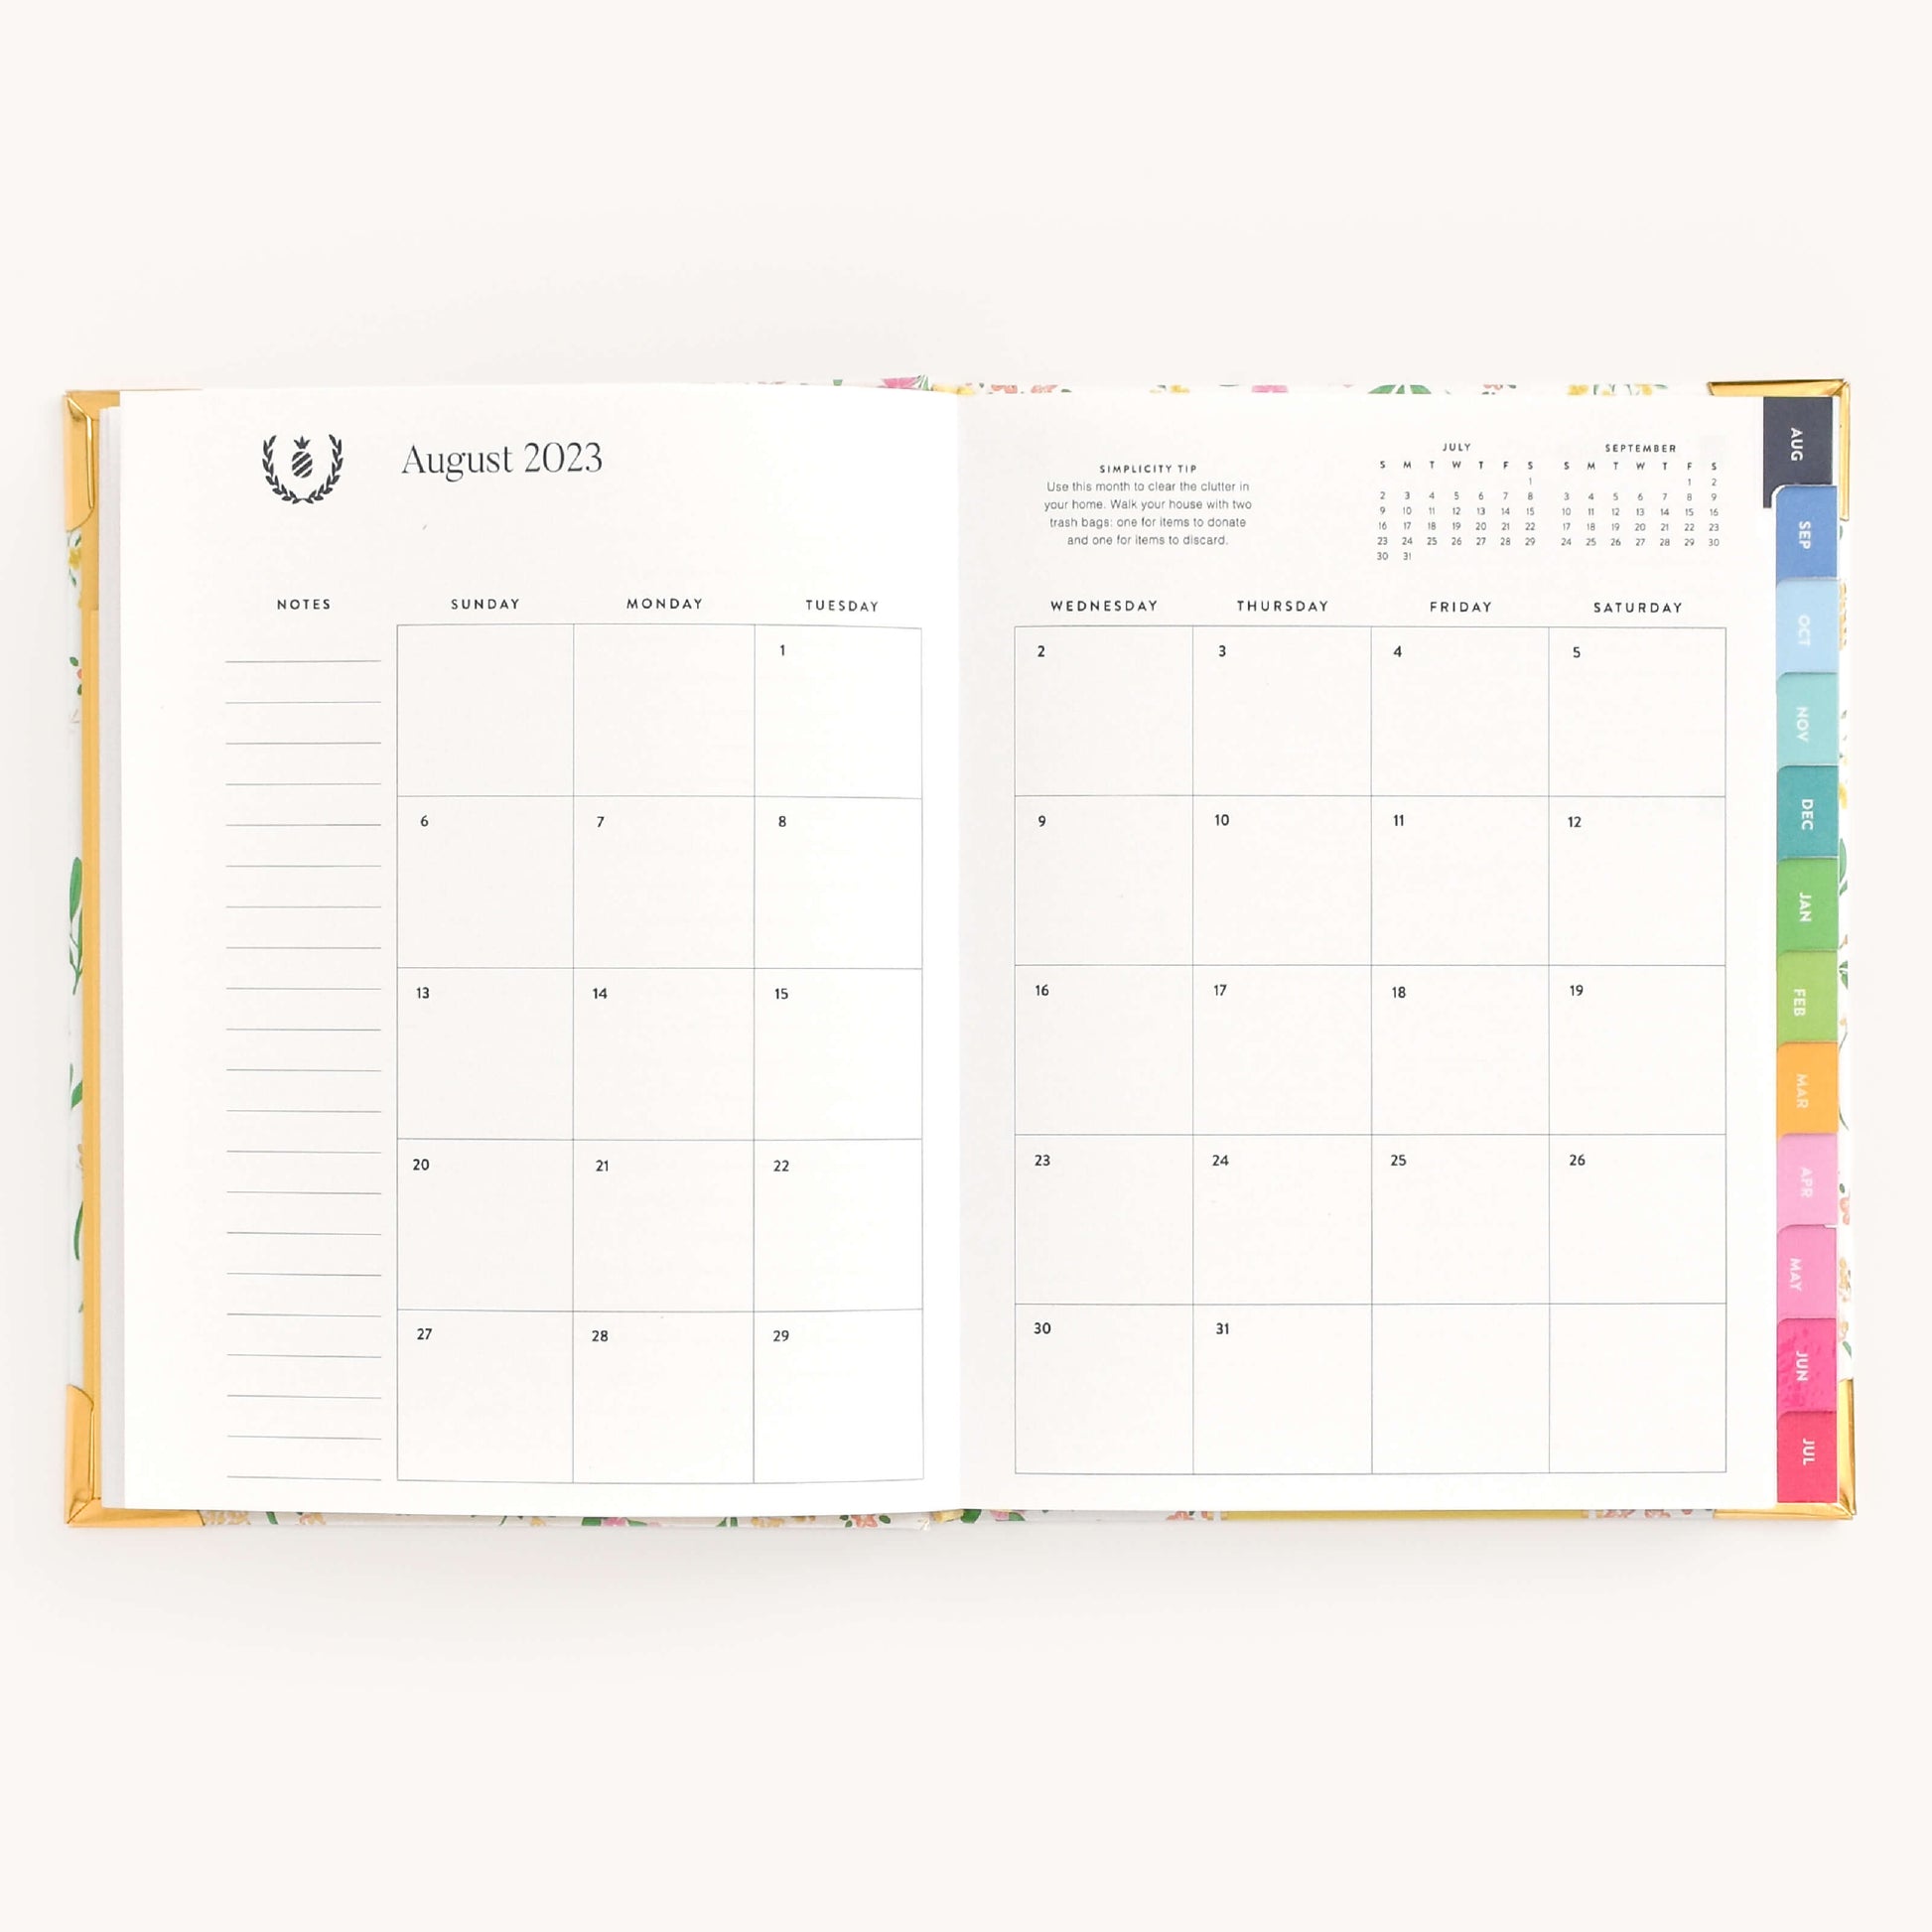 15 Best Paper Planners (2023): Planners, Pens, Stickers, and a